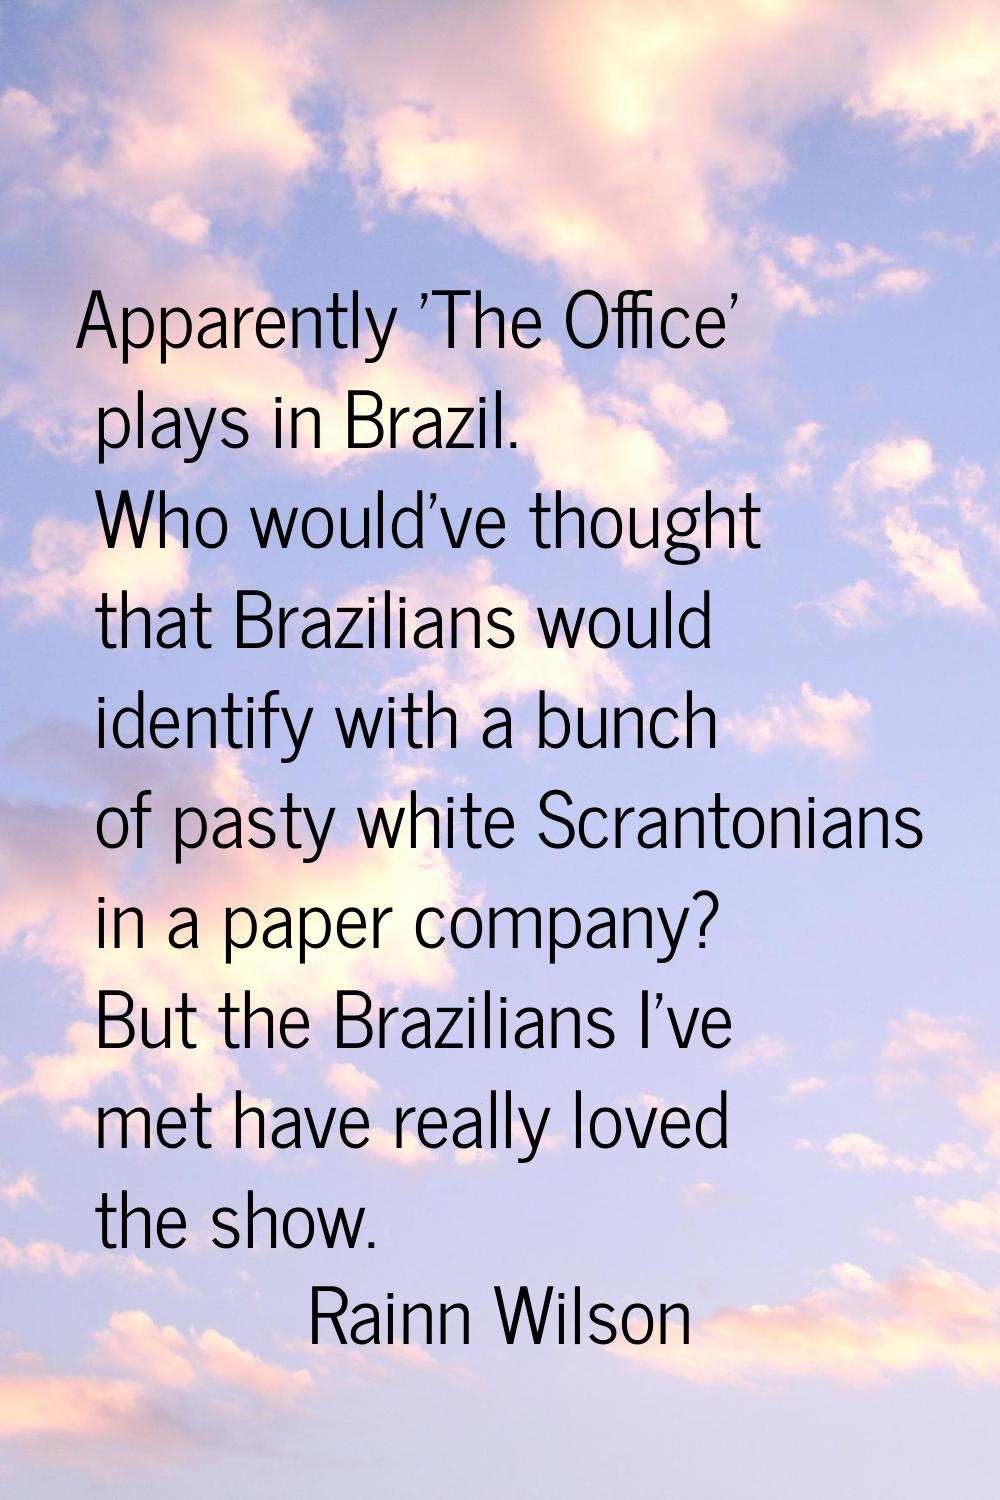 Apparently 'The Office' plays in Brazil. Who would've thought that Brazilians would identify with a